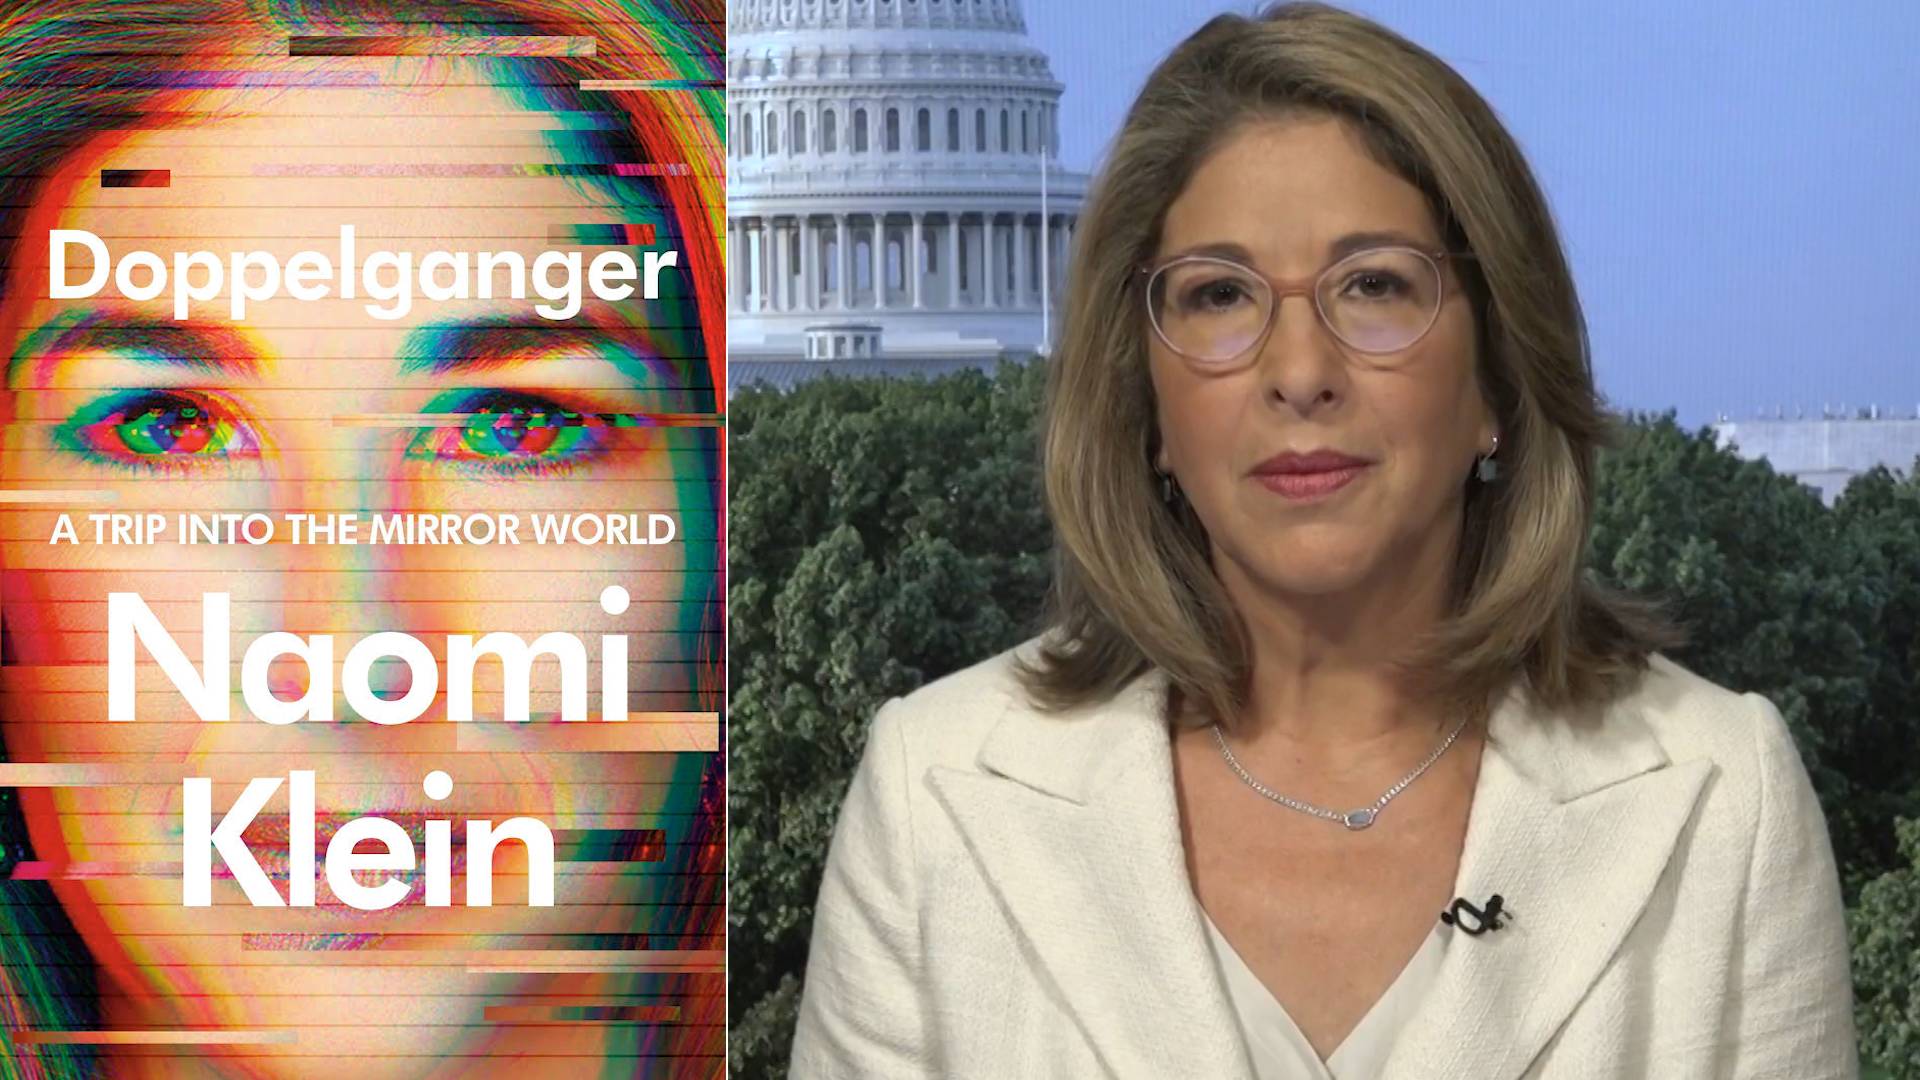 Naomi Klein on Her New Book “Doppelganger” & How Conspiracy